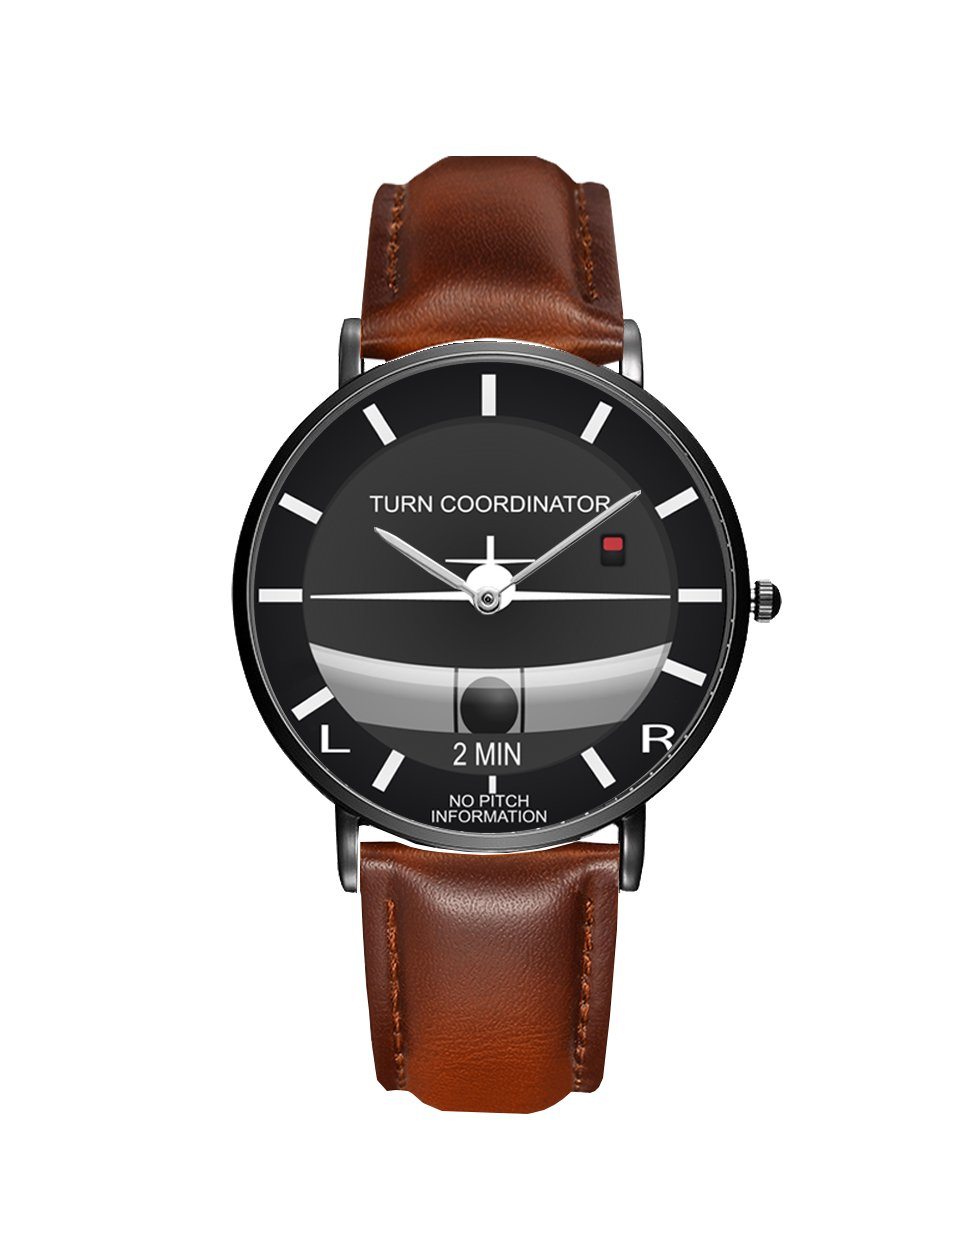 Airplane Instrument Series (Turn Coordinator) Leather Strap Watches Pilot Eyes Store Black & Brown Leather Strap 